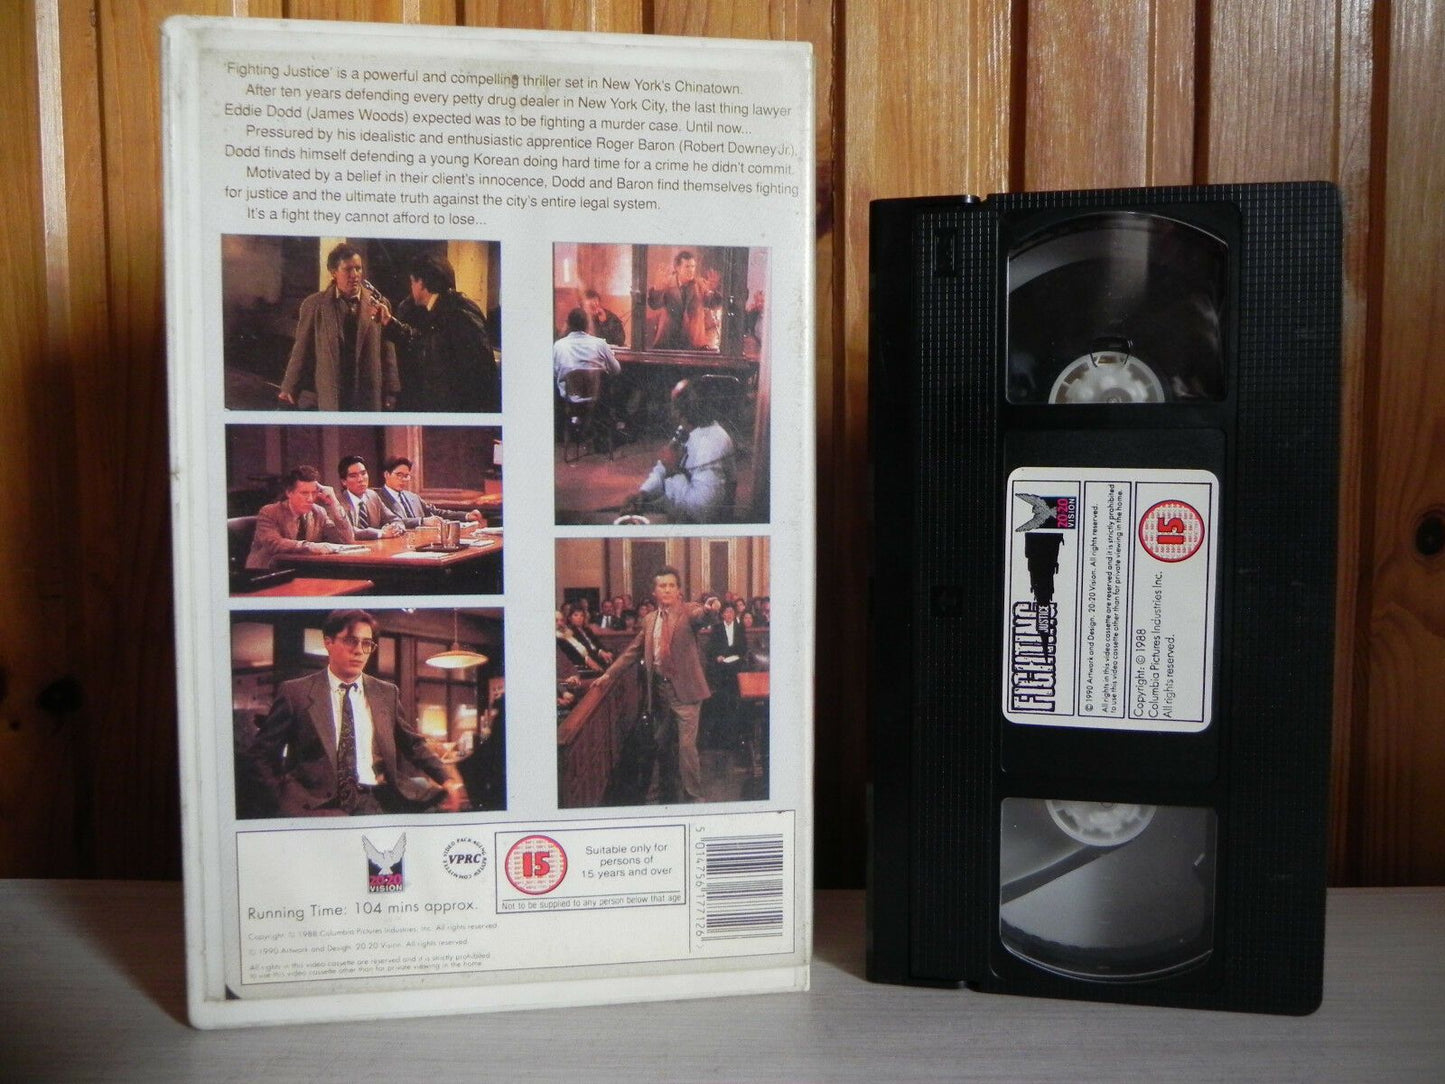 Fighting Justice - New York China Town - Crime Thriller - 20/20 Big Video - VHS-